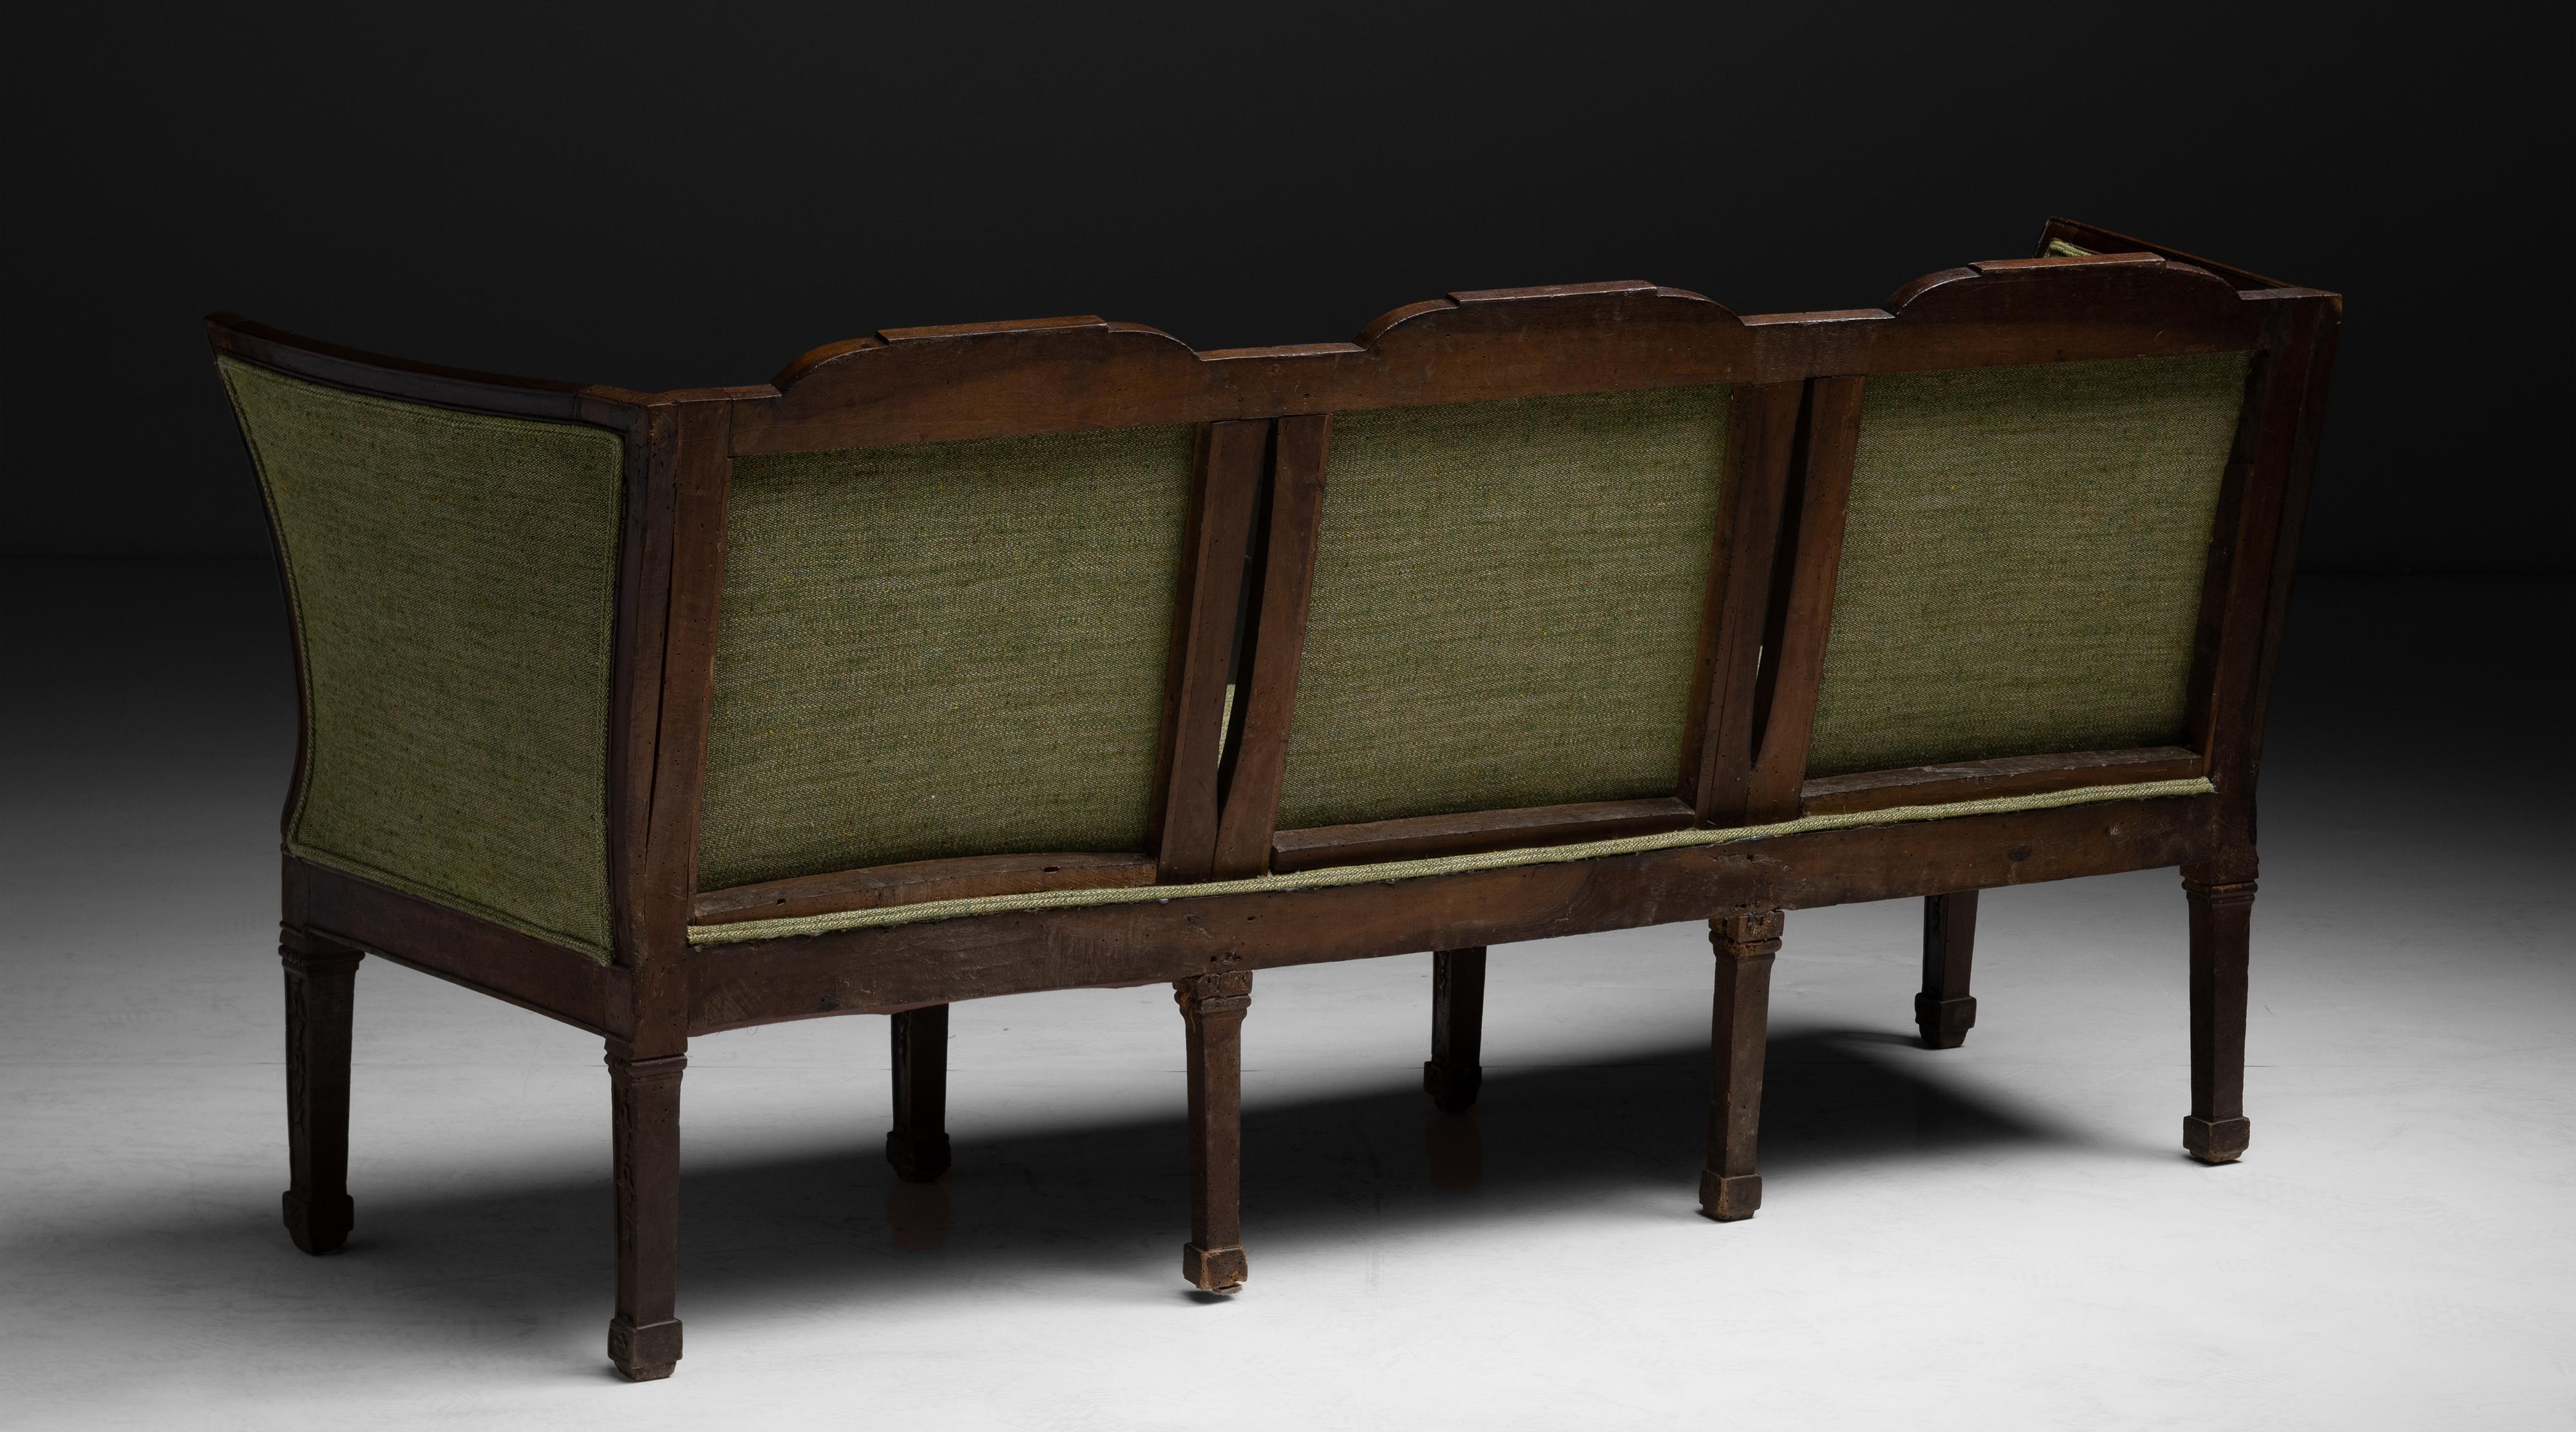 French Hall Sofa in Linen Wool Blend, France, circa 1840